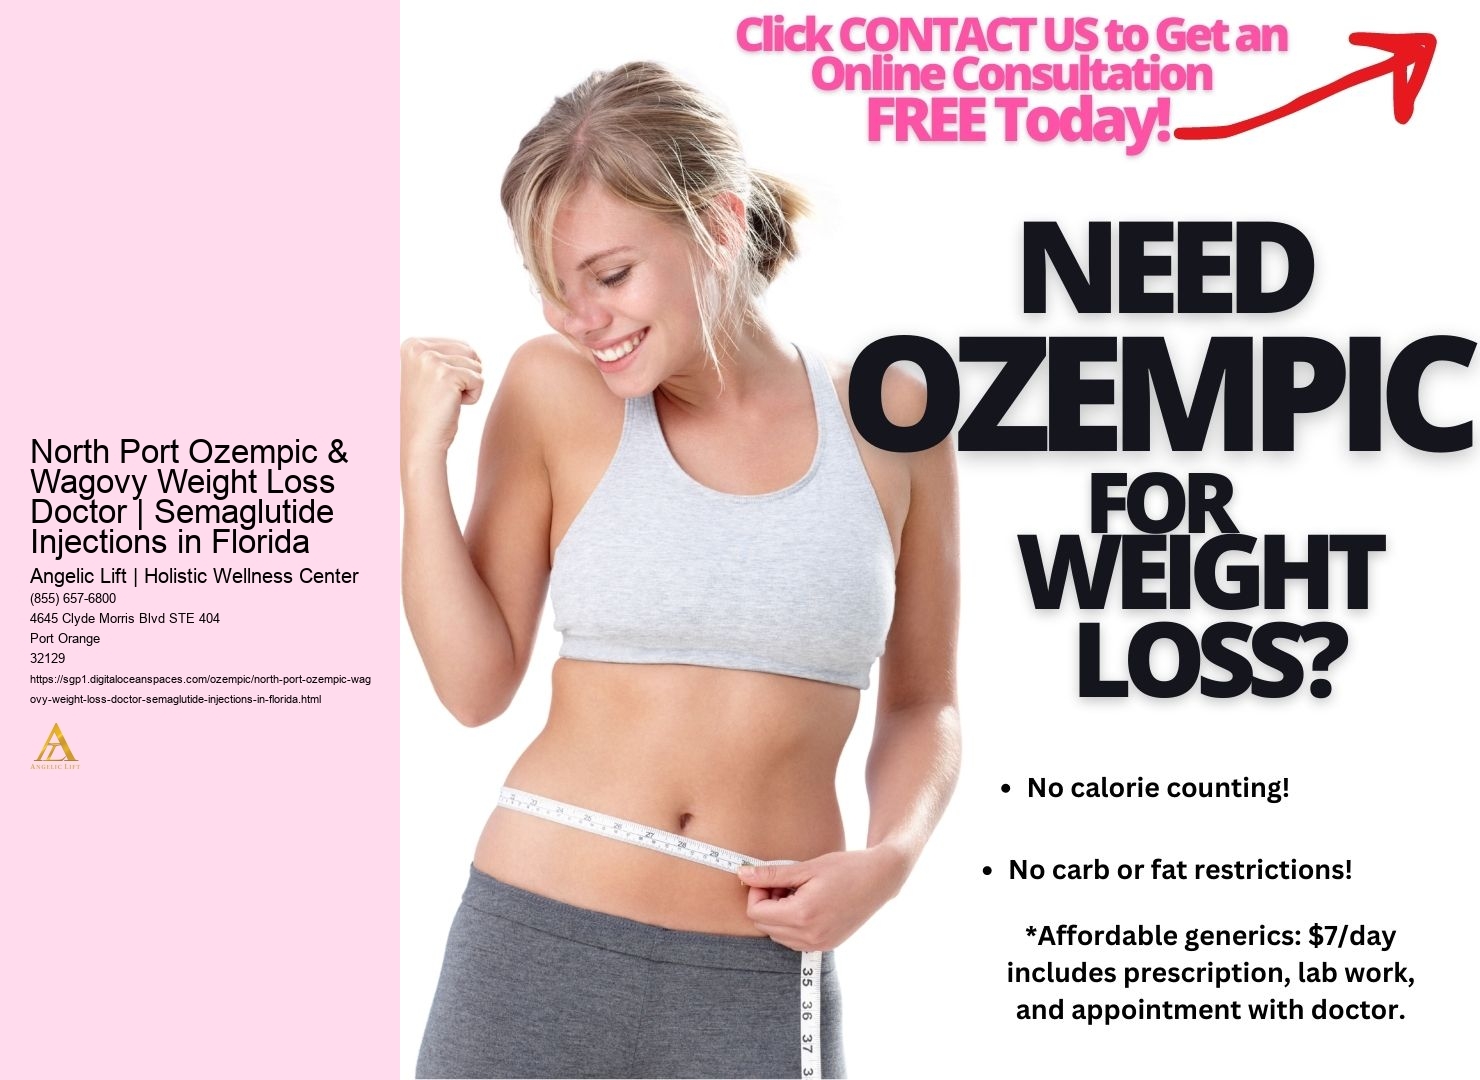 North Port Ozempic & Wagovy Weight Loss Doctor | Semaglutide Injections in Florida